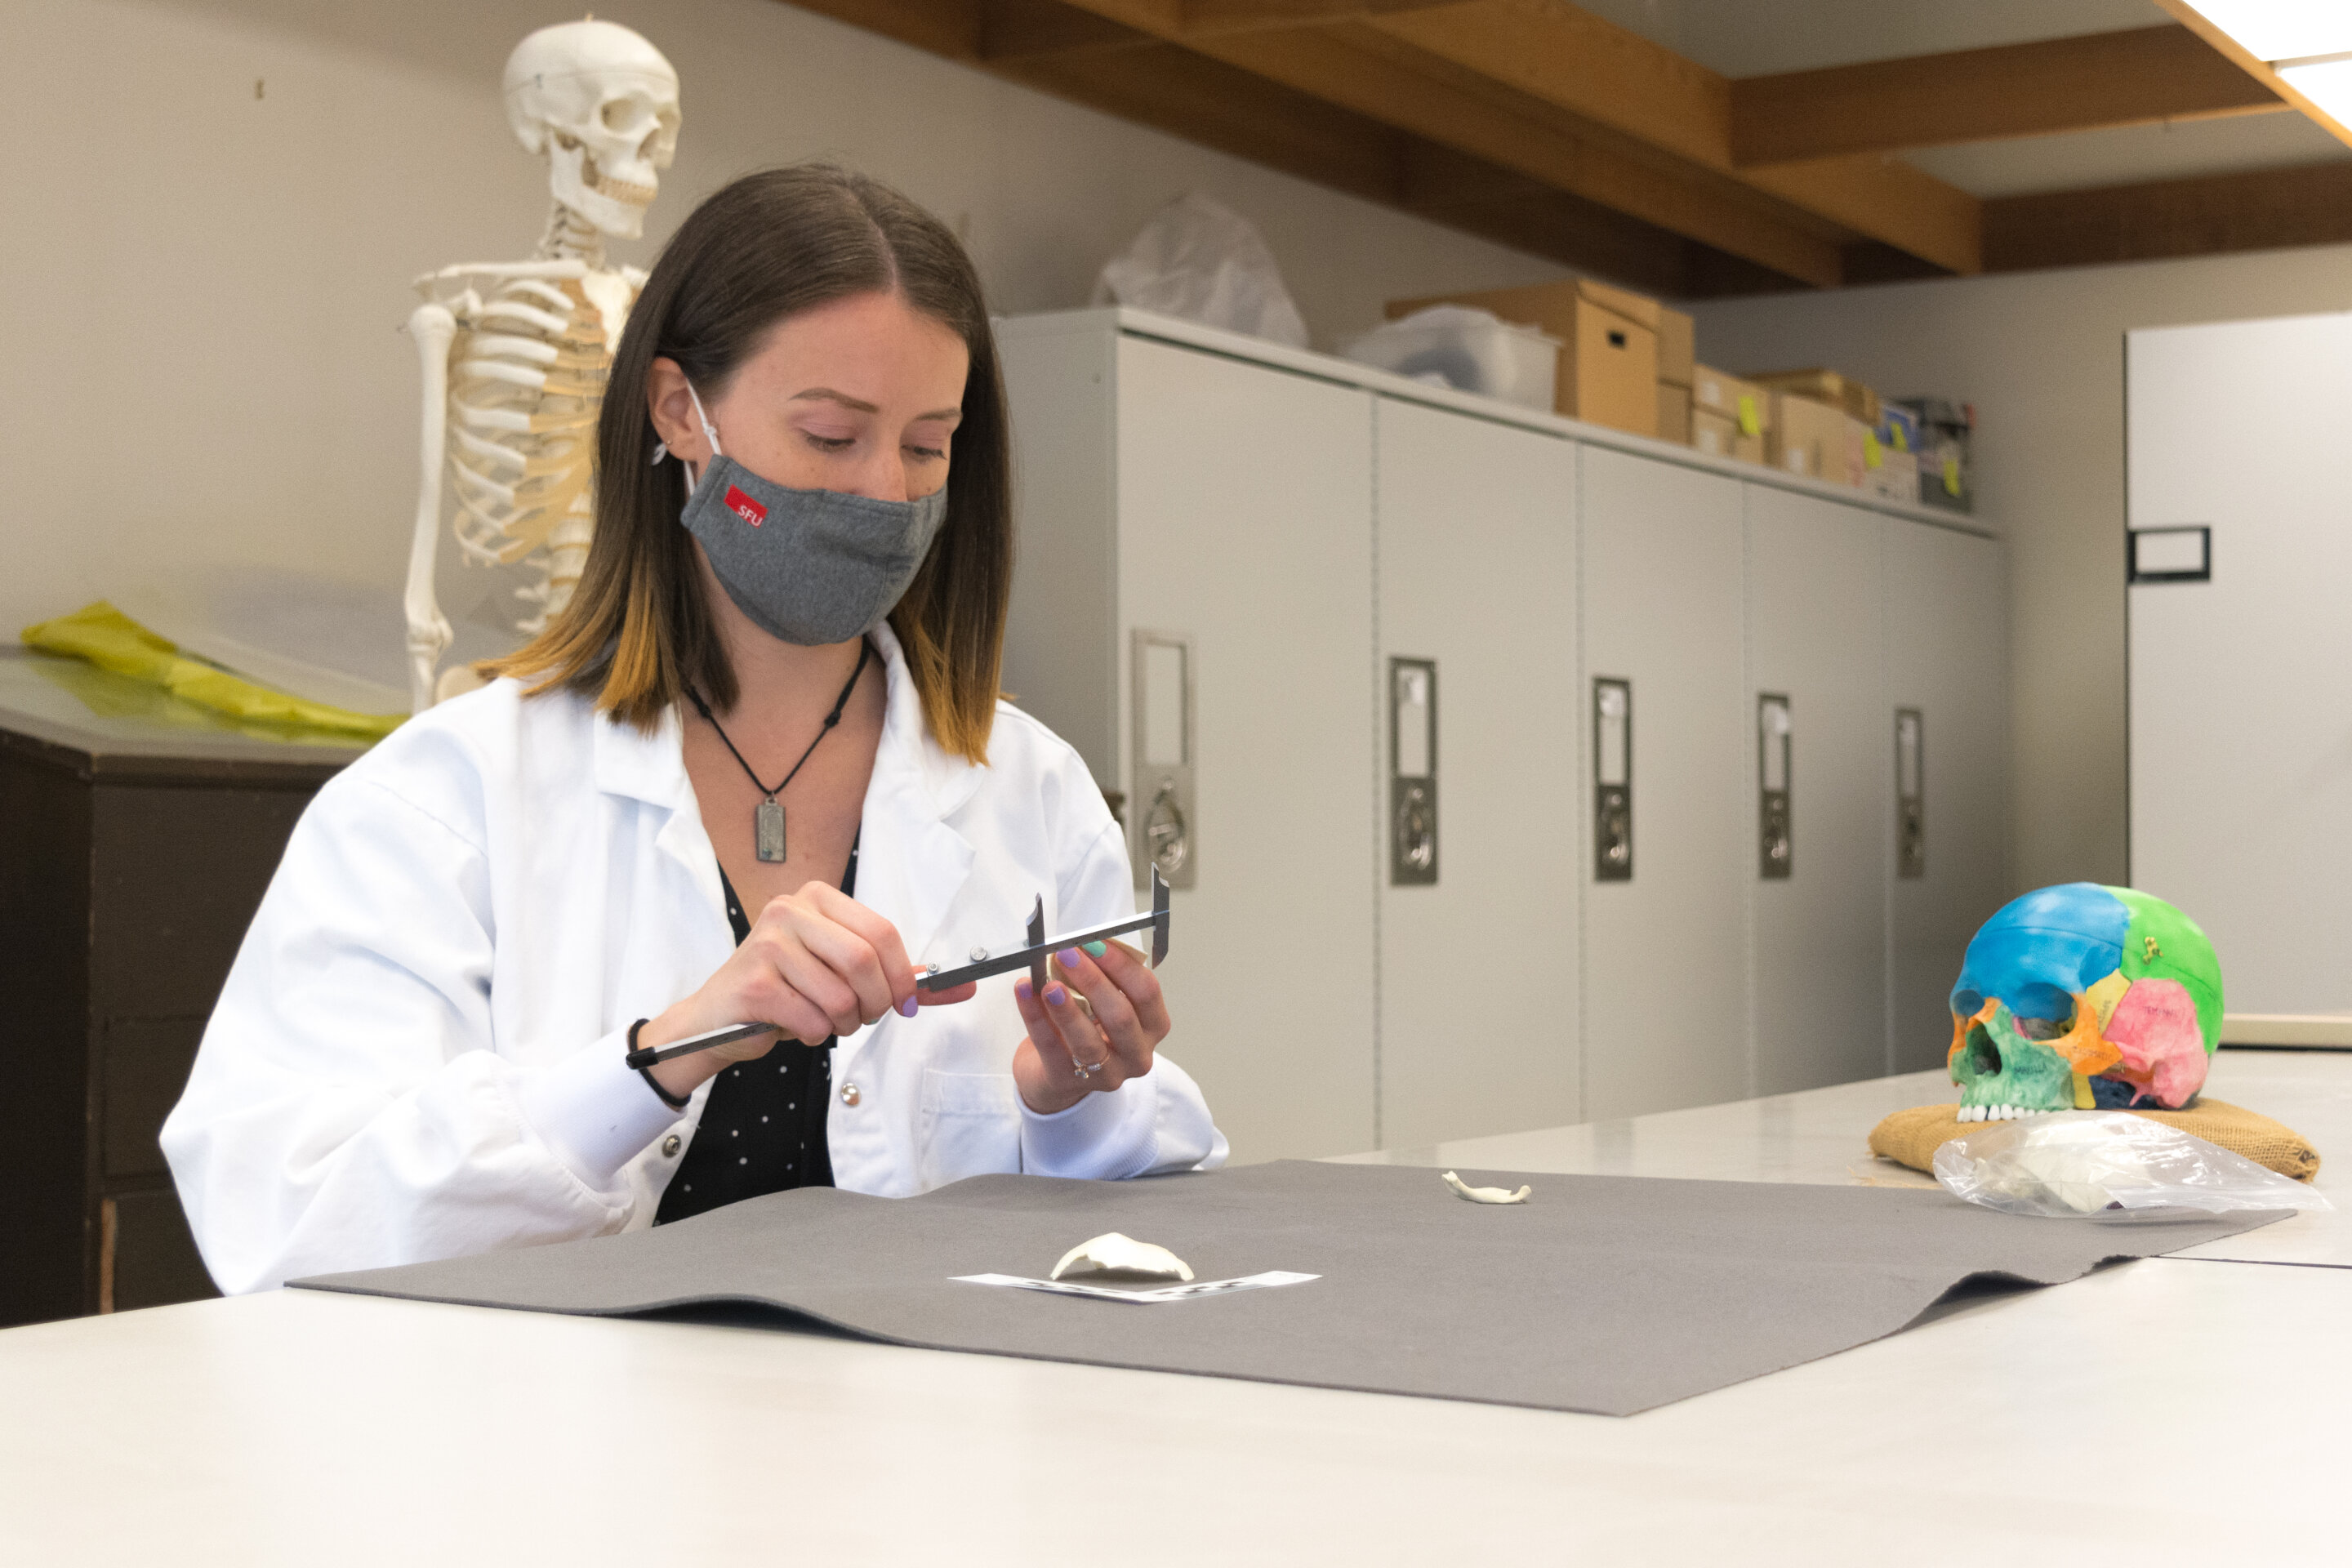 Deanna Smith, an SFU archeology MA student and study lead author, measures a bone in the lab. Credit: Kobie Huang